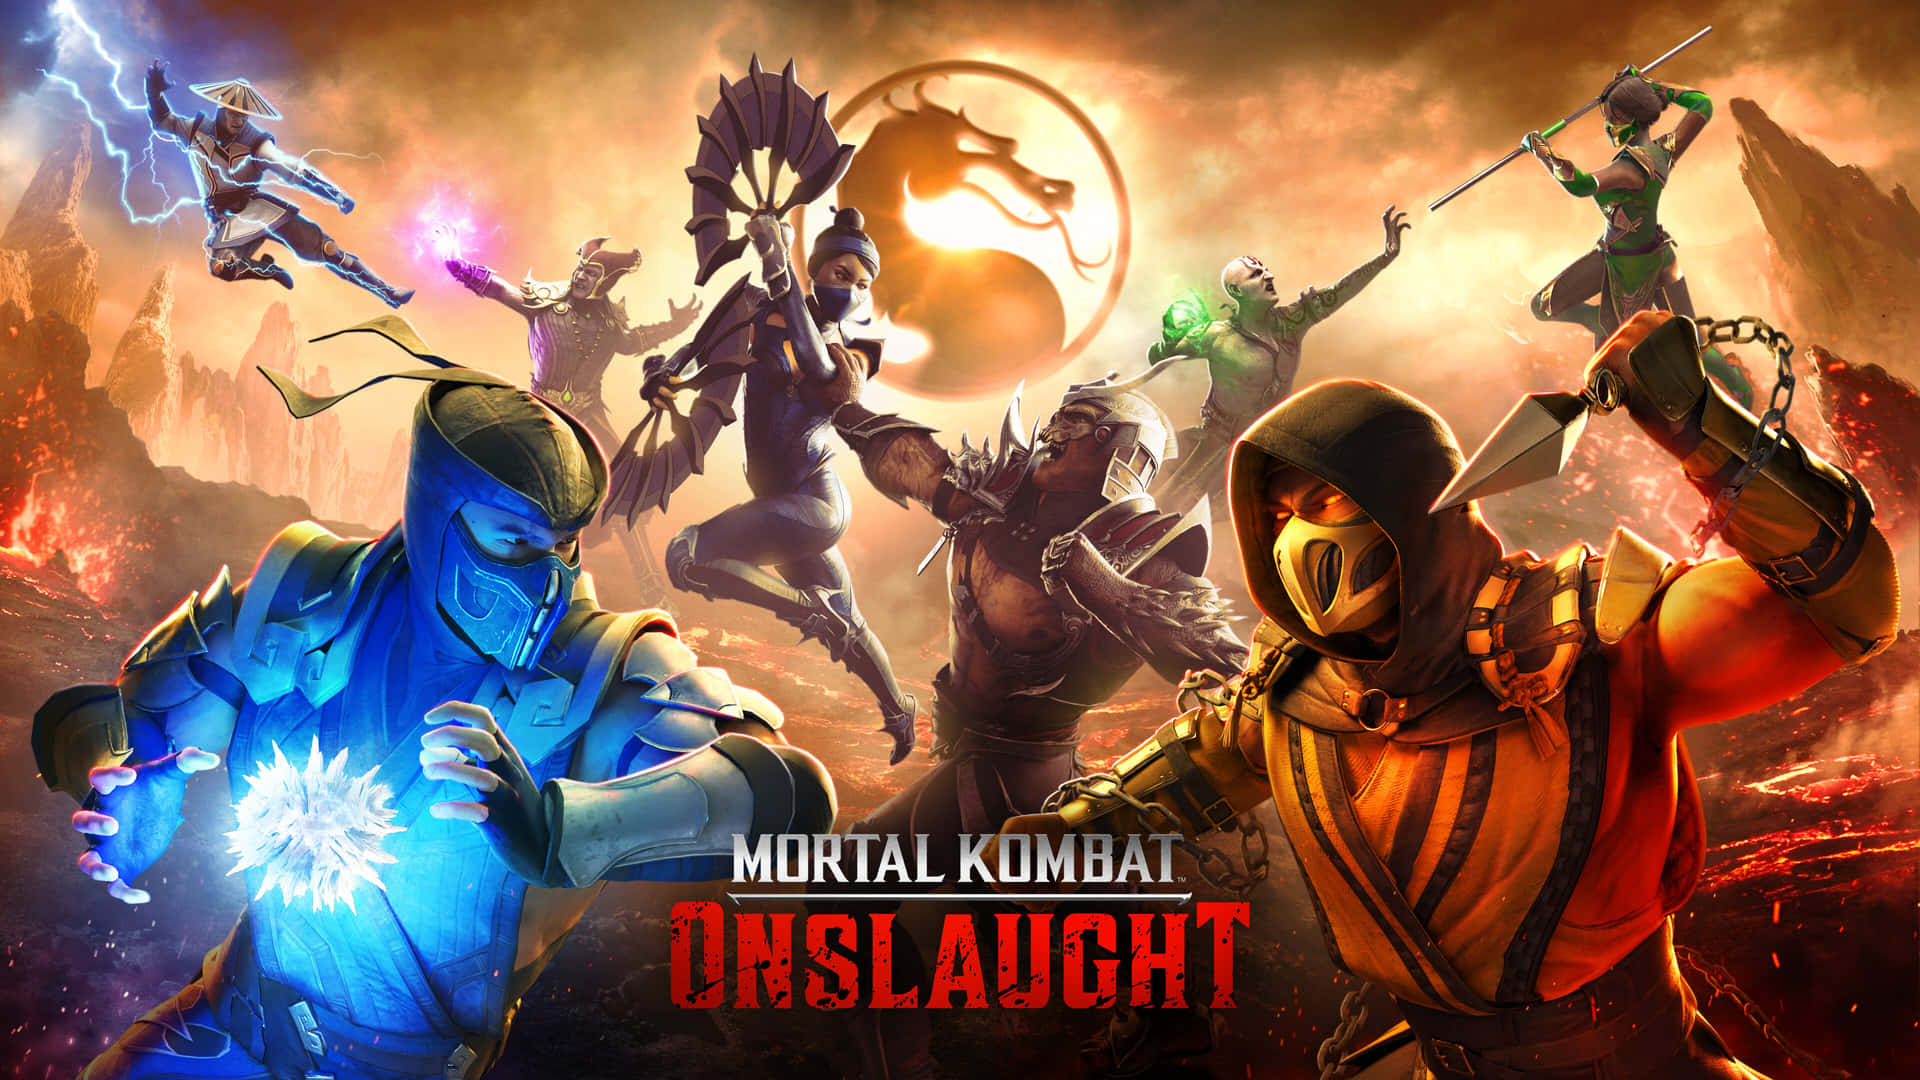 Fight to the Finish in Mortal Kombat